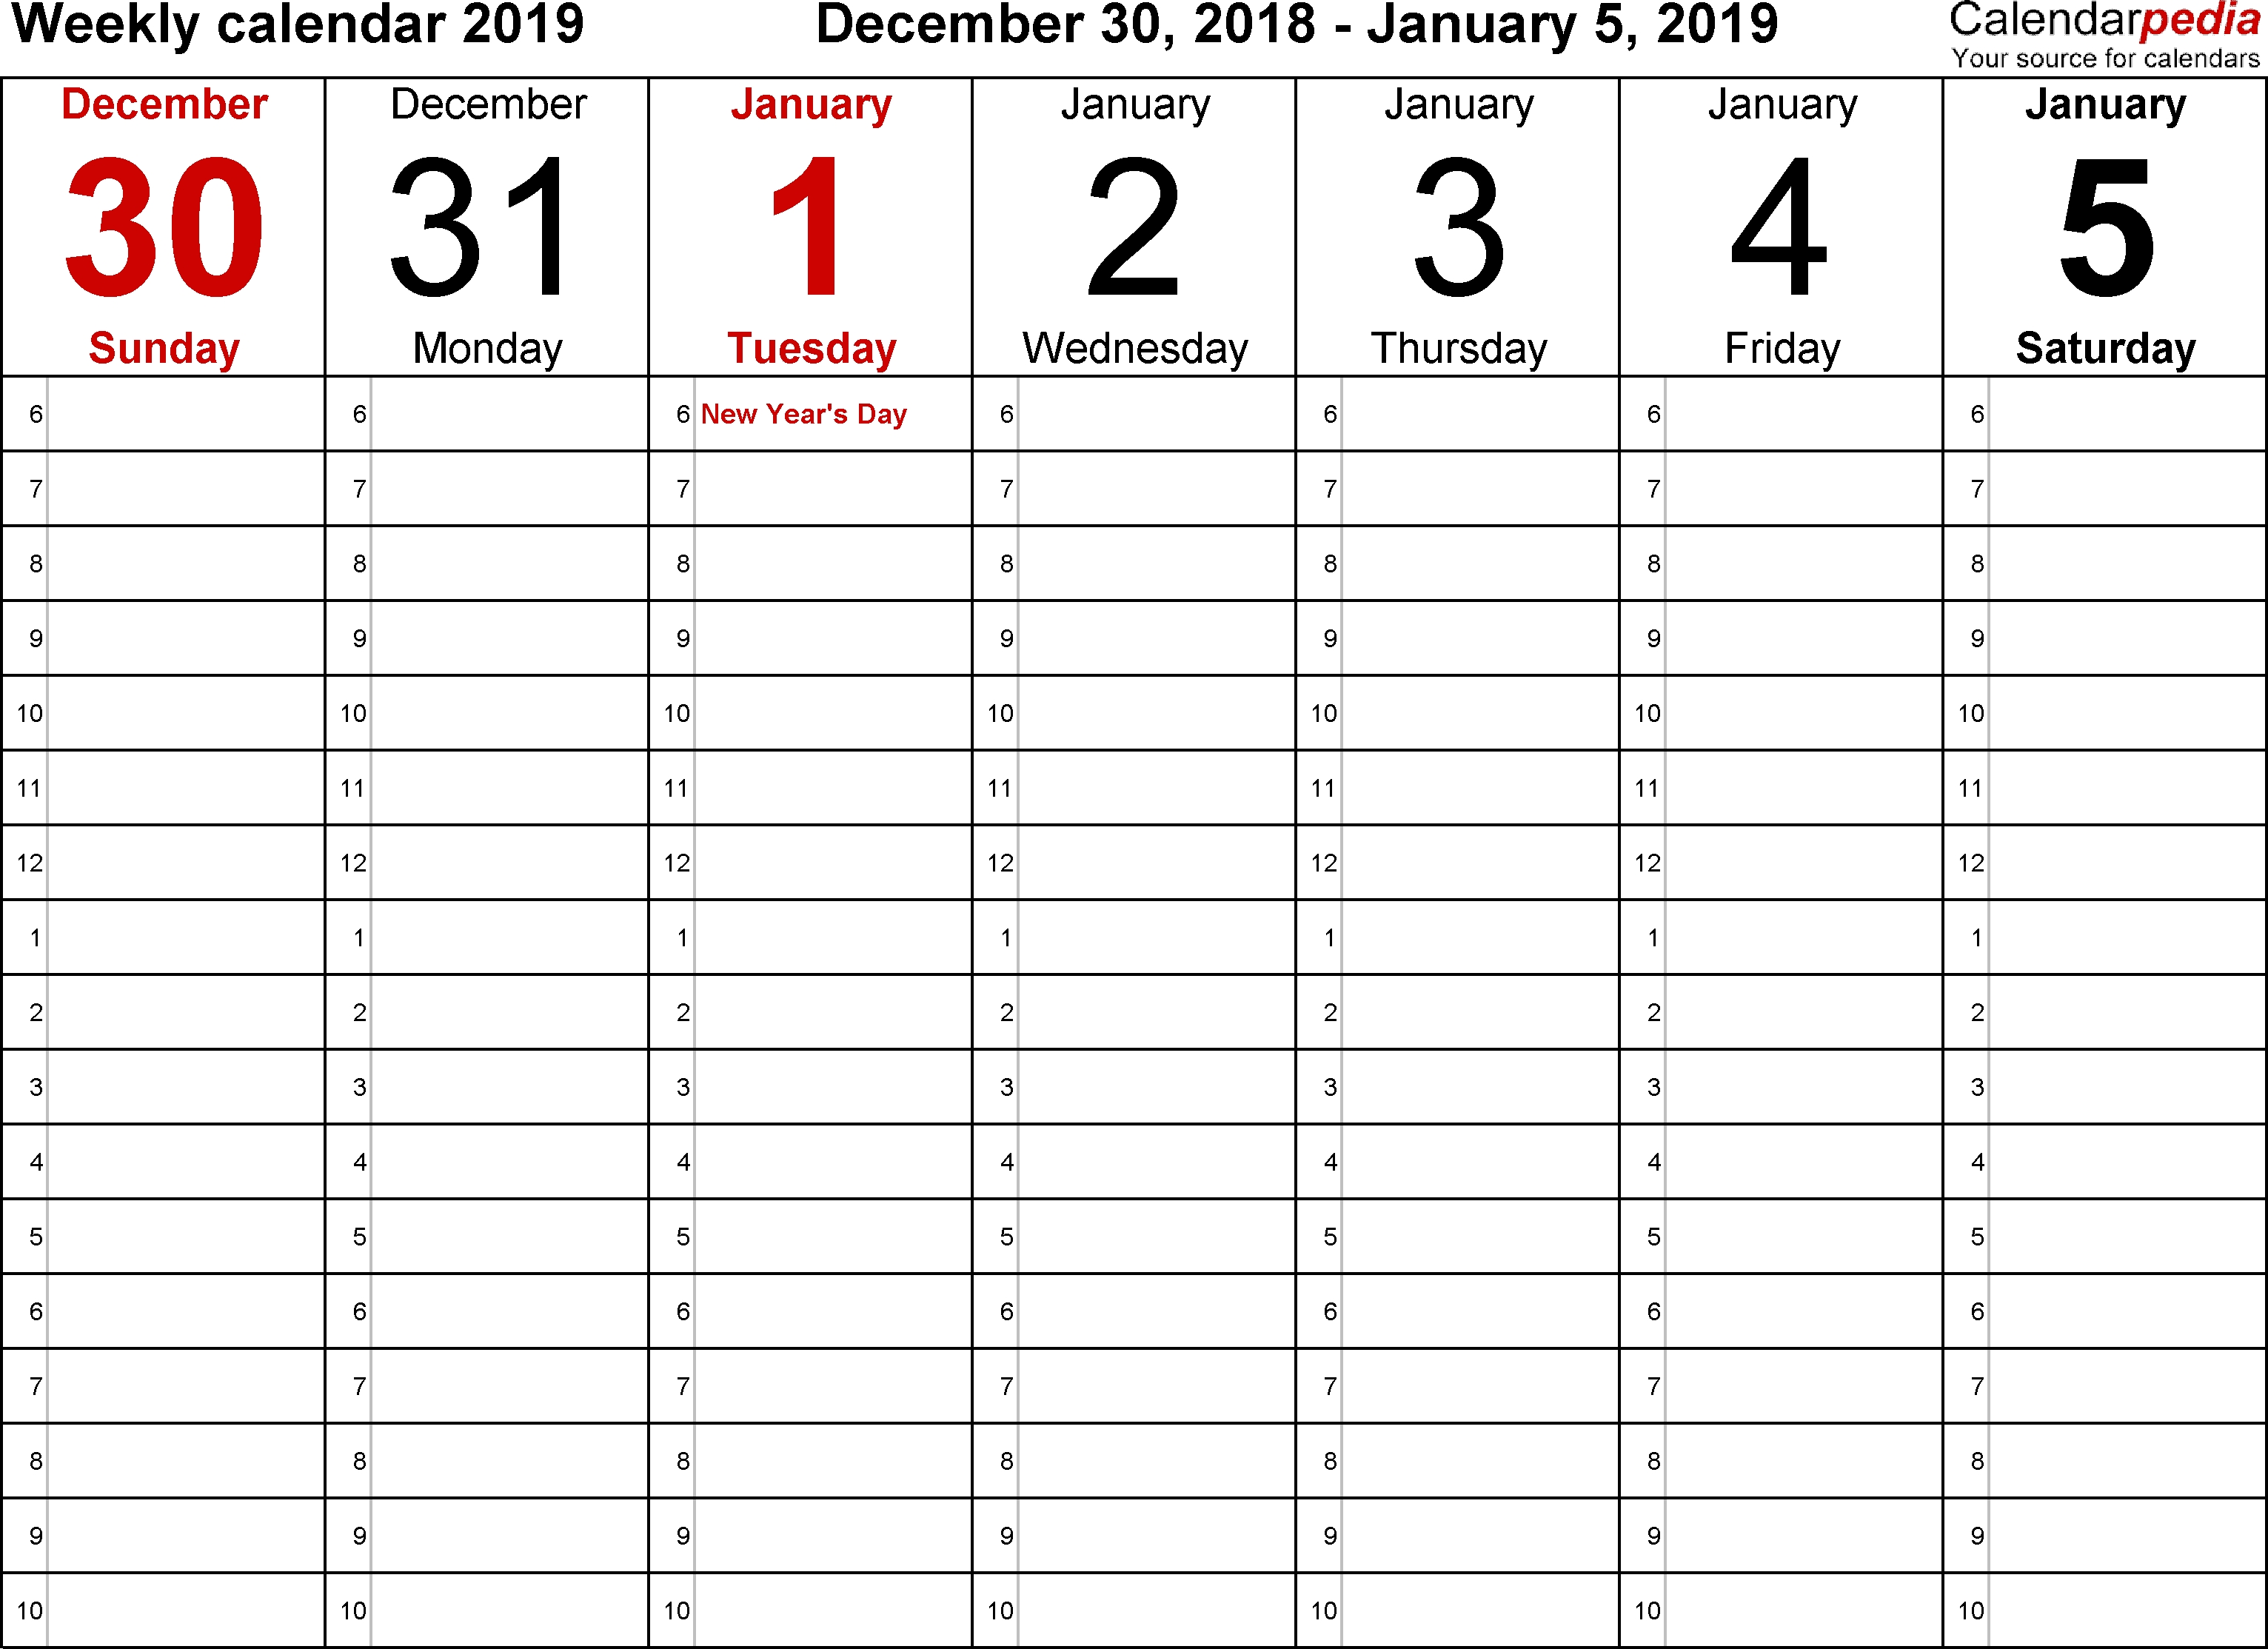 Weekly Calendar 2019 For Word - 12 Free Printable Templates throughout Printable Blank Weekly Calendar With Times